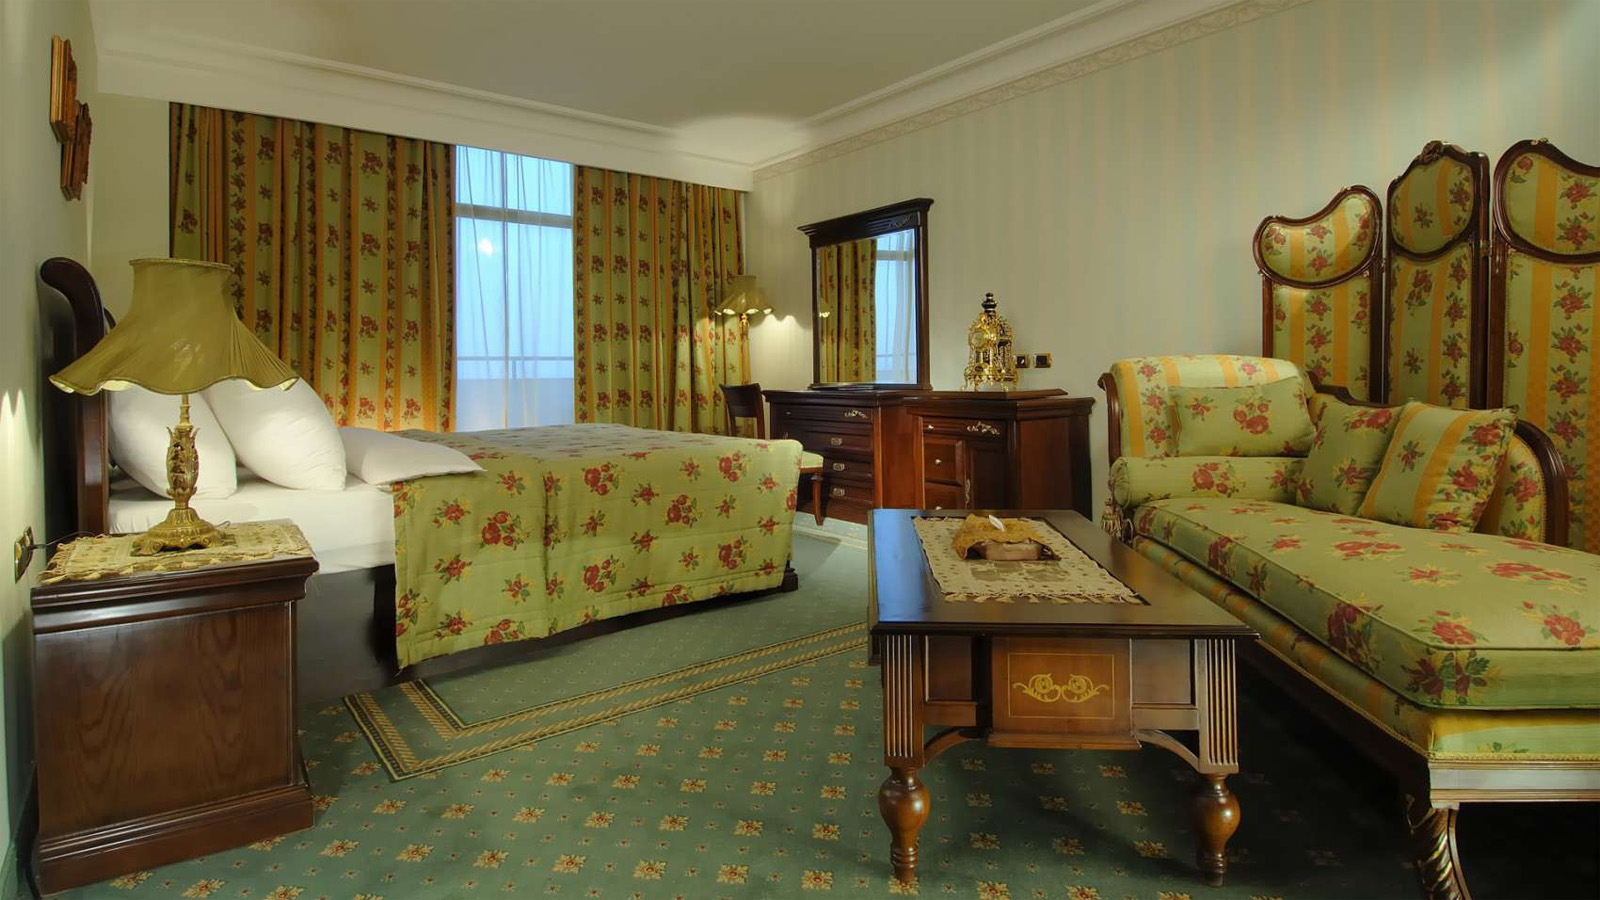 The Most Expensive Hotel Rooms In The World’s Most Expensive Cities